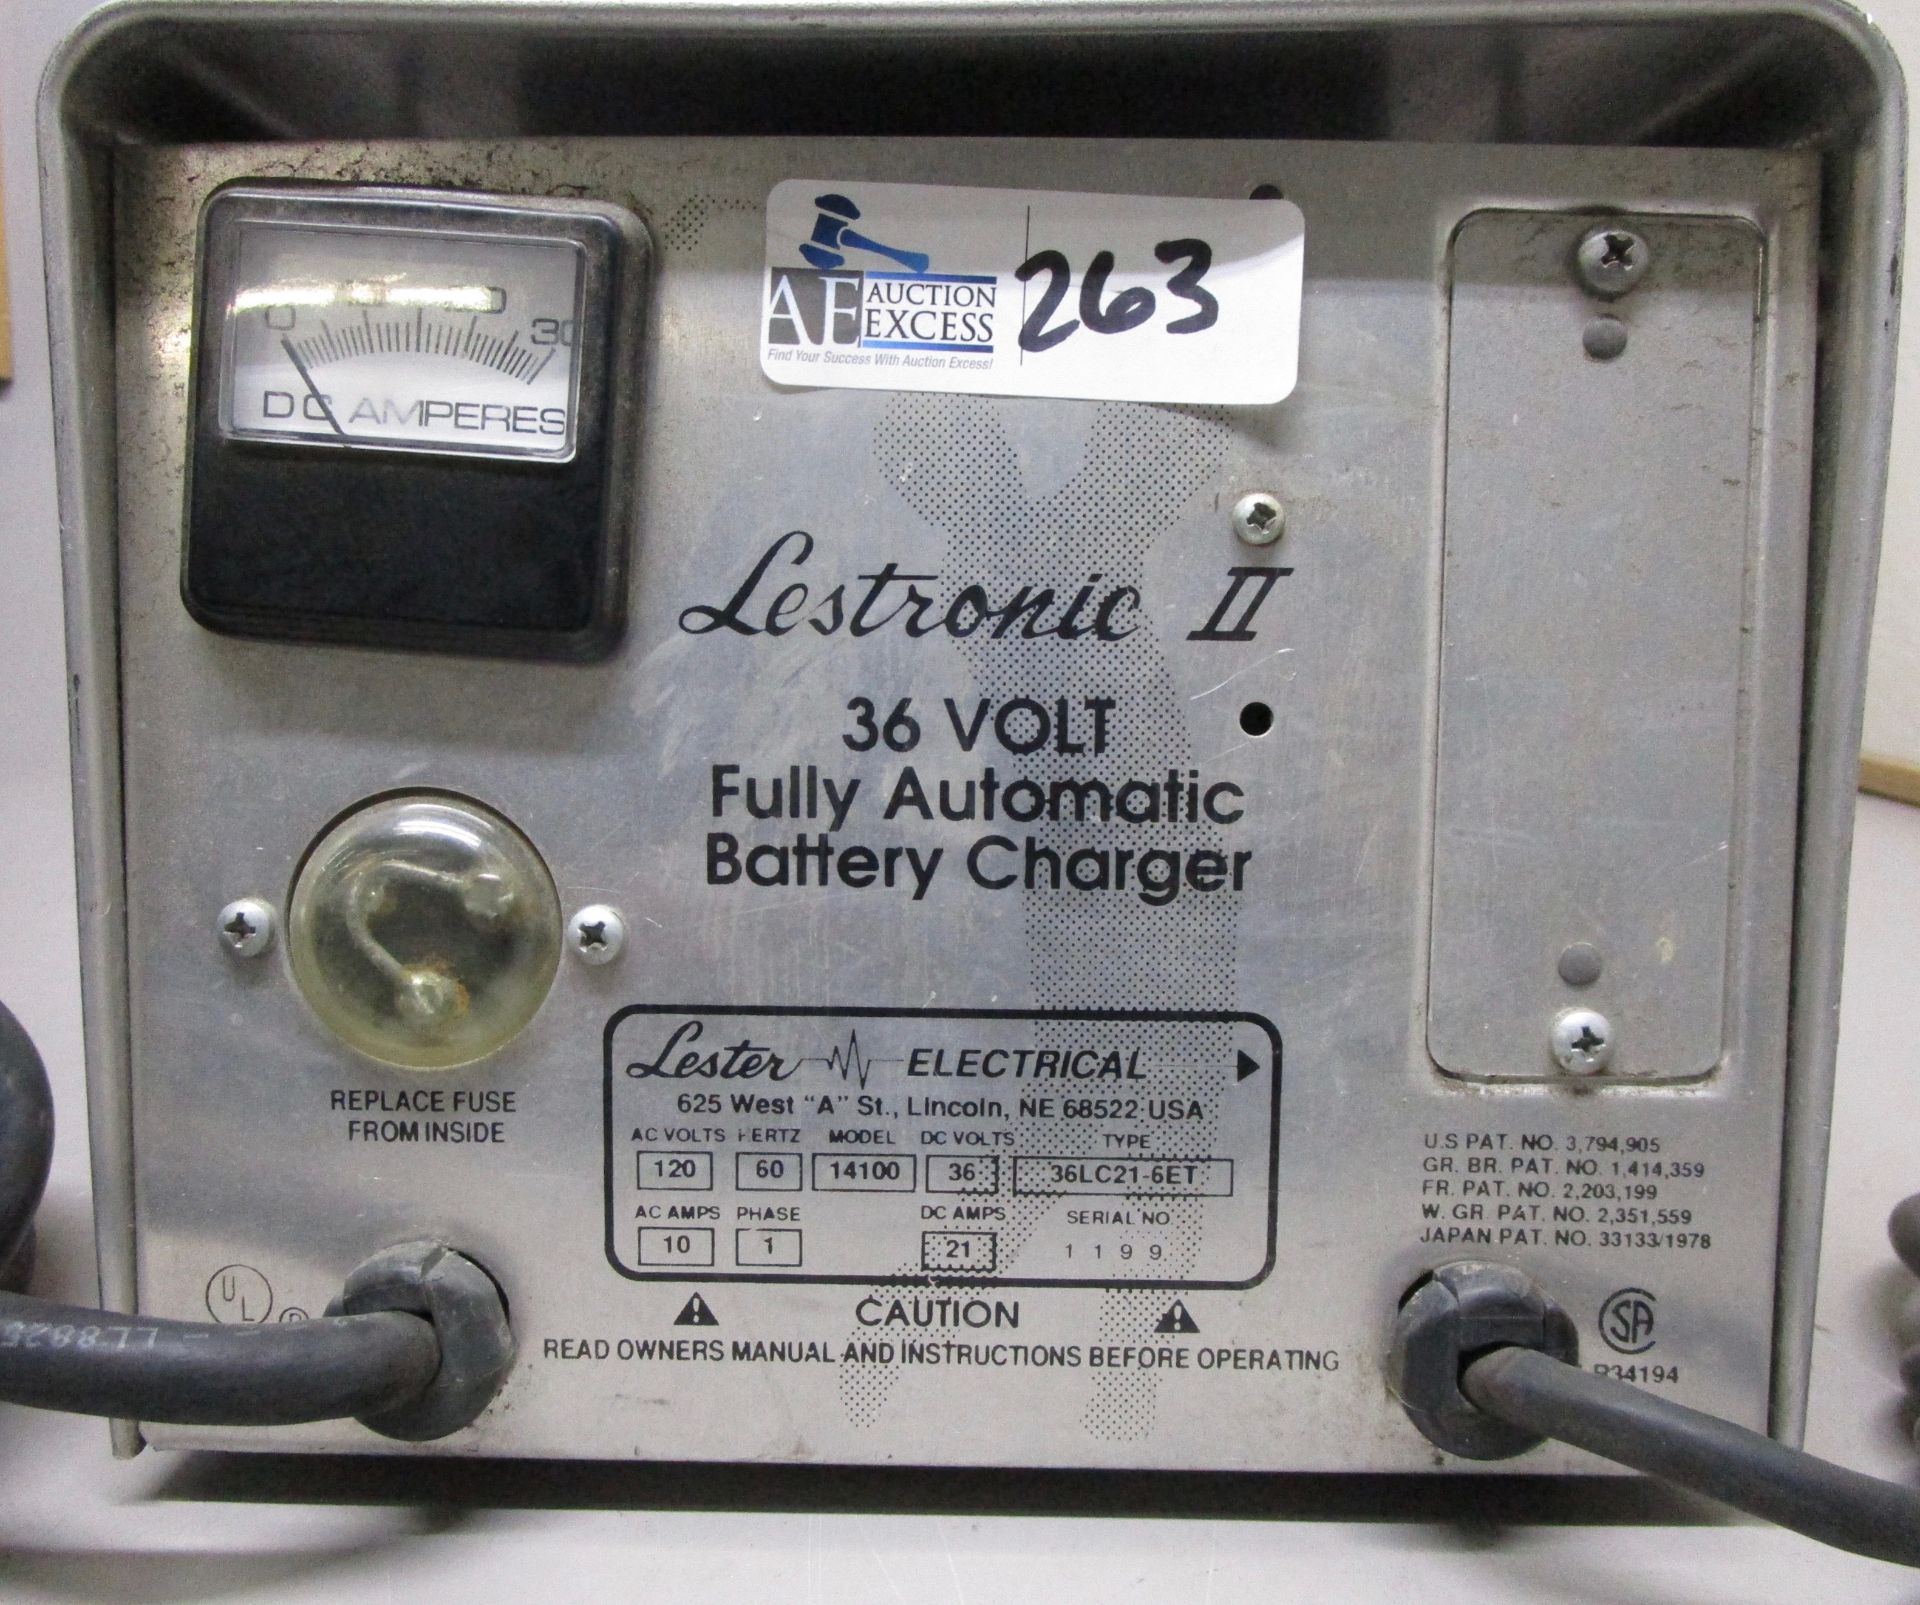 LESTRONIC II 36 VOLT AUTOMATIC BATTERY CHARGER